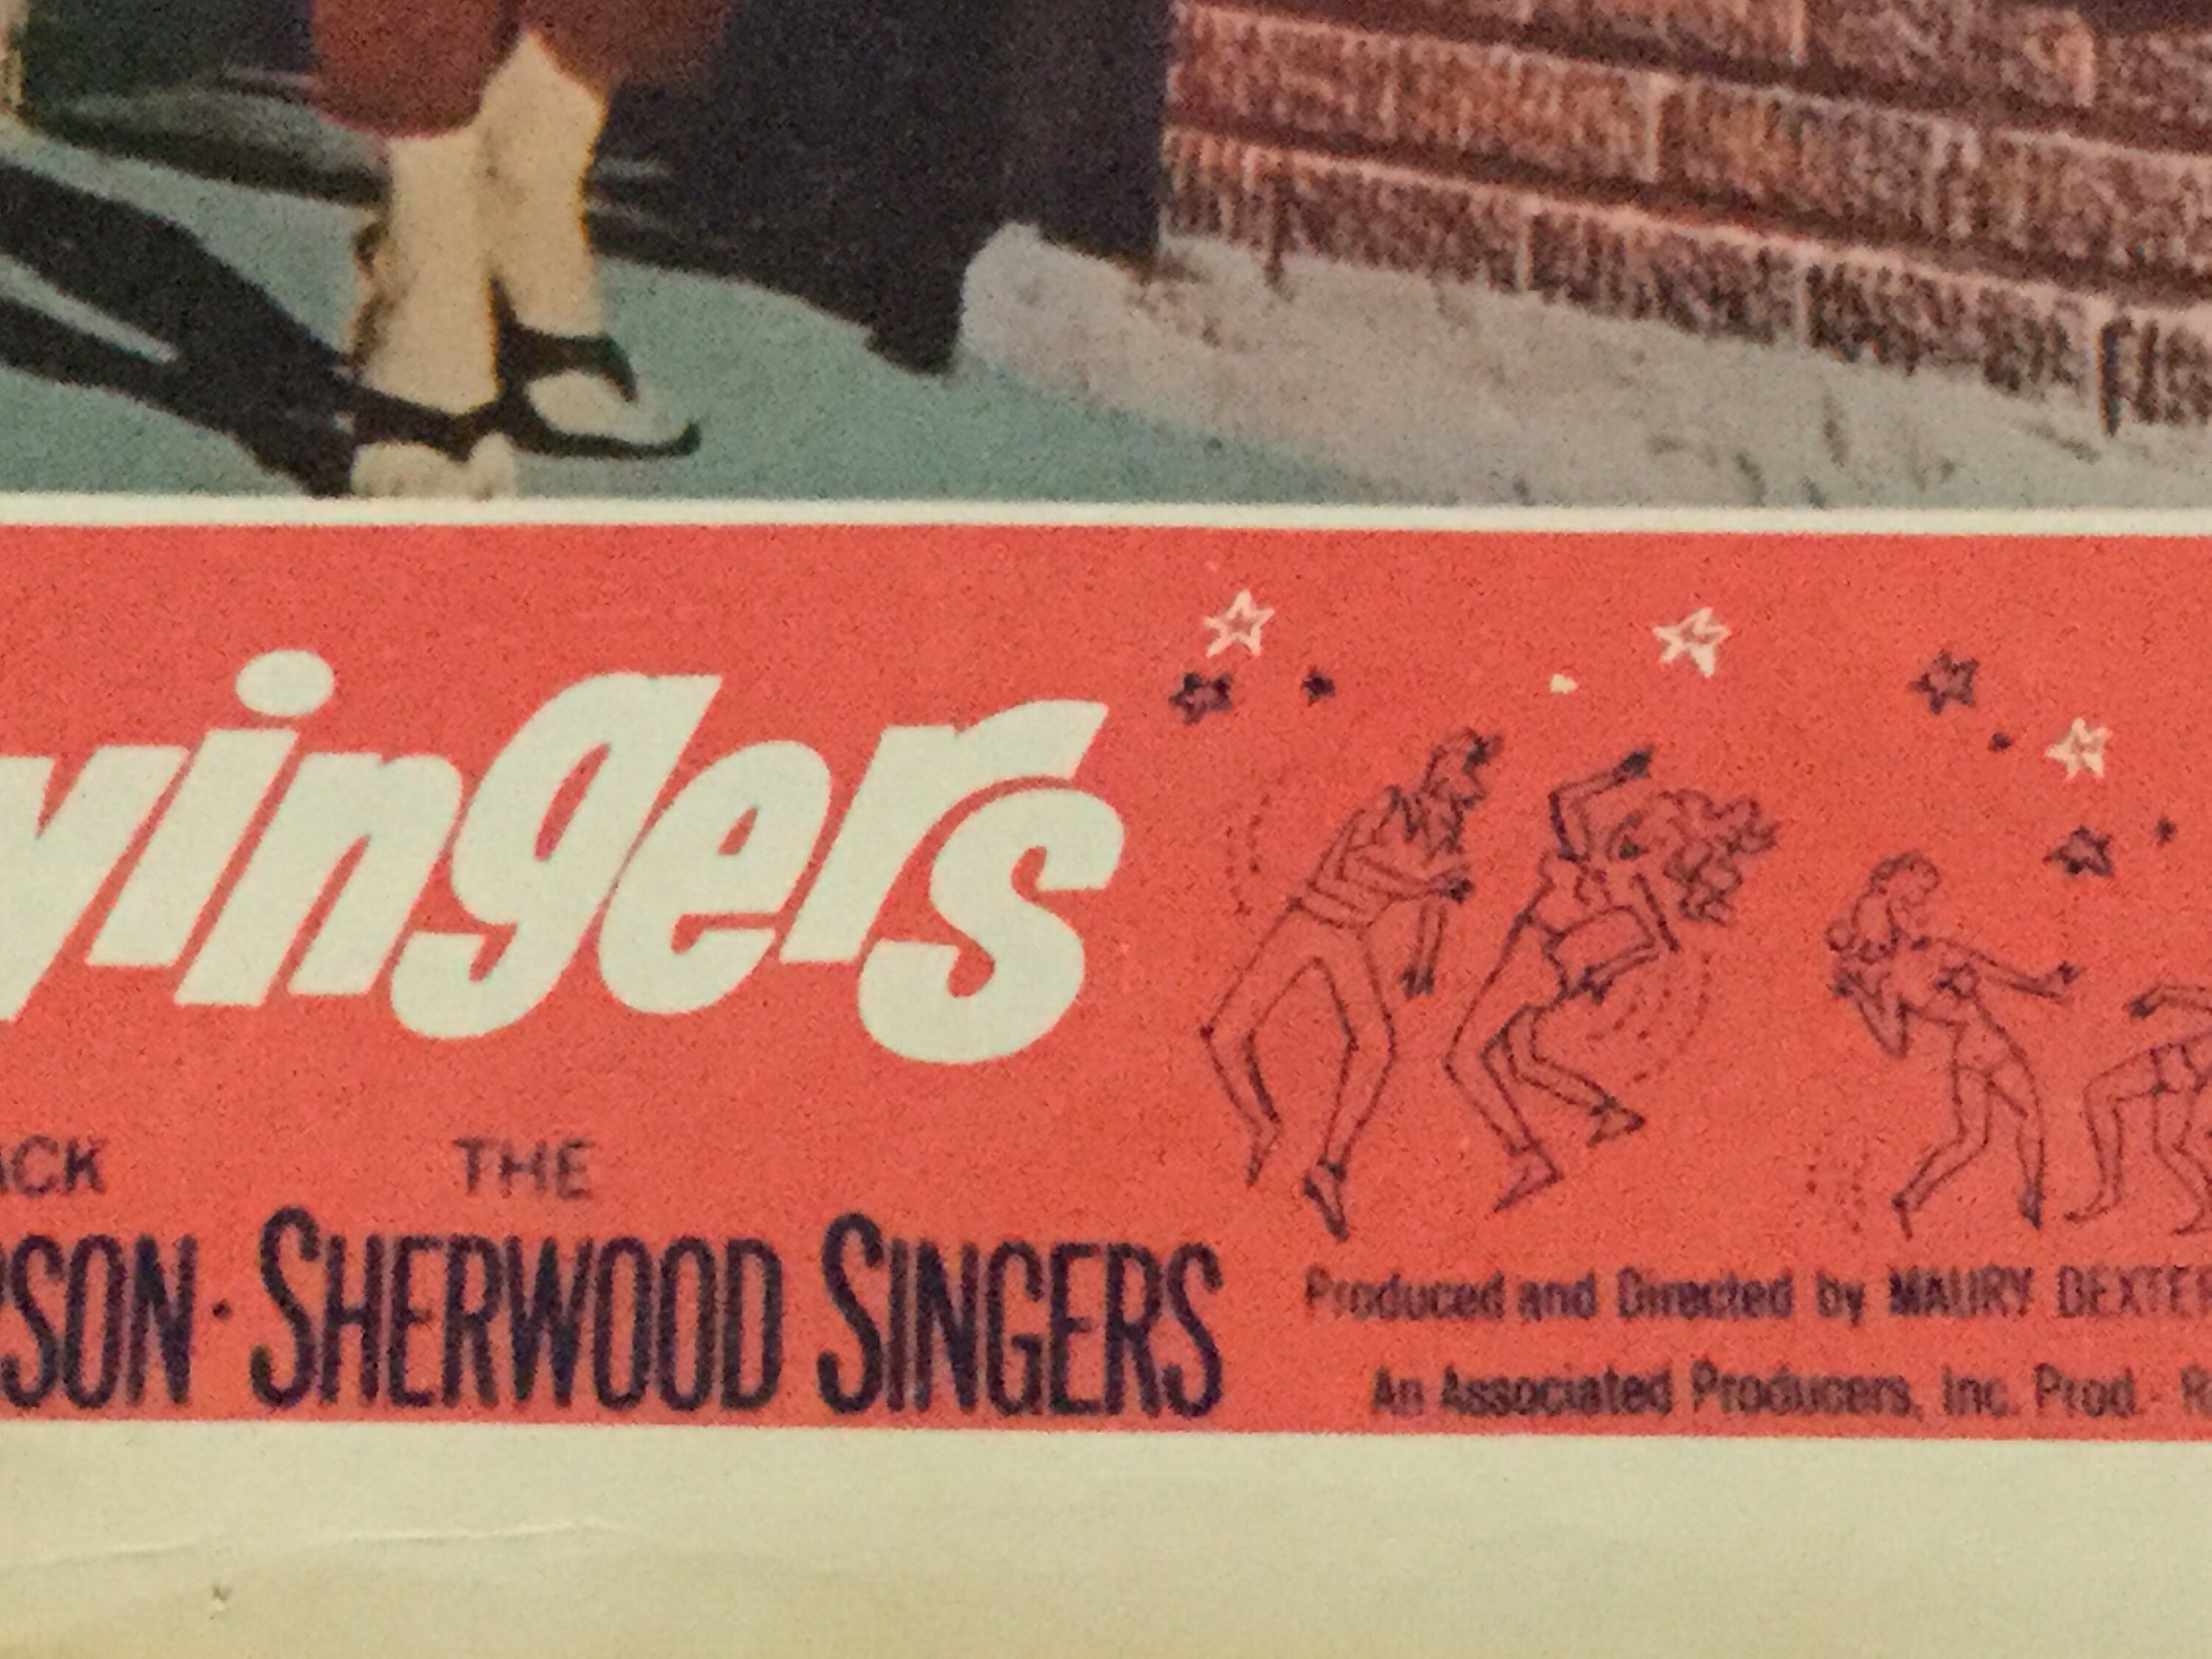 sherwood singers the young swingers Porn Photos Hd